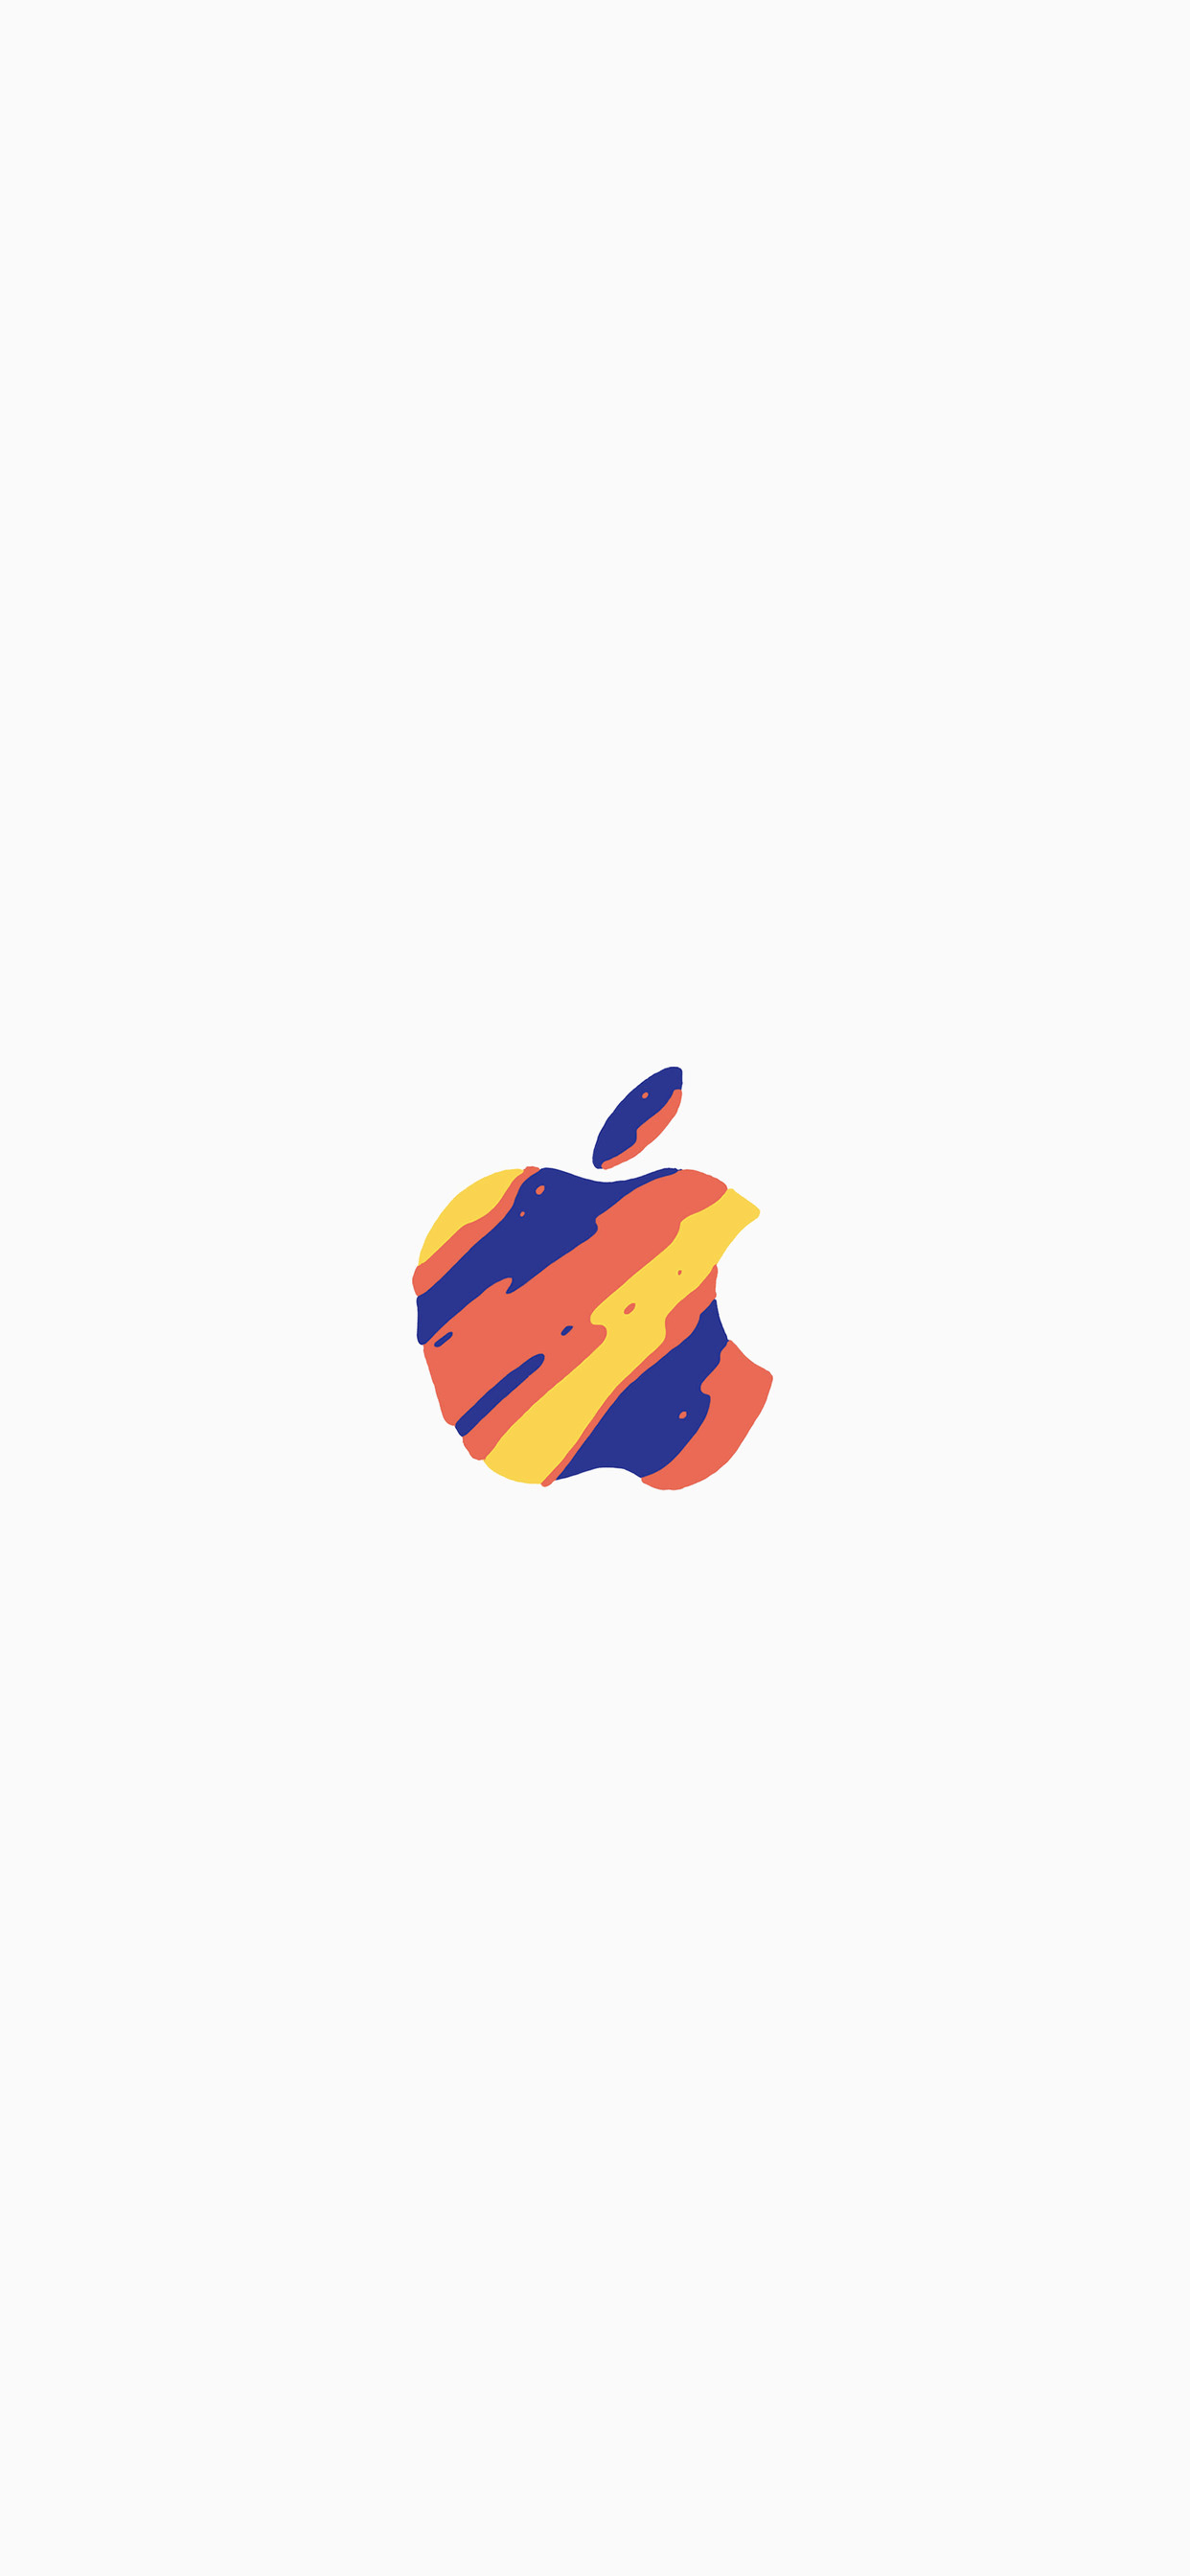 2018 Apple Logo - There's more in the making: 33 Apple logo wallpapers